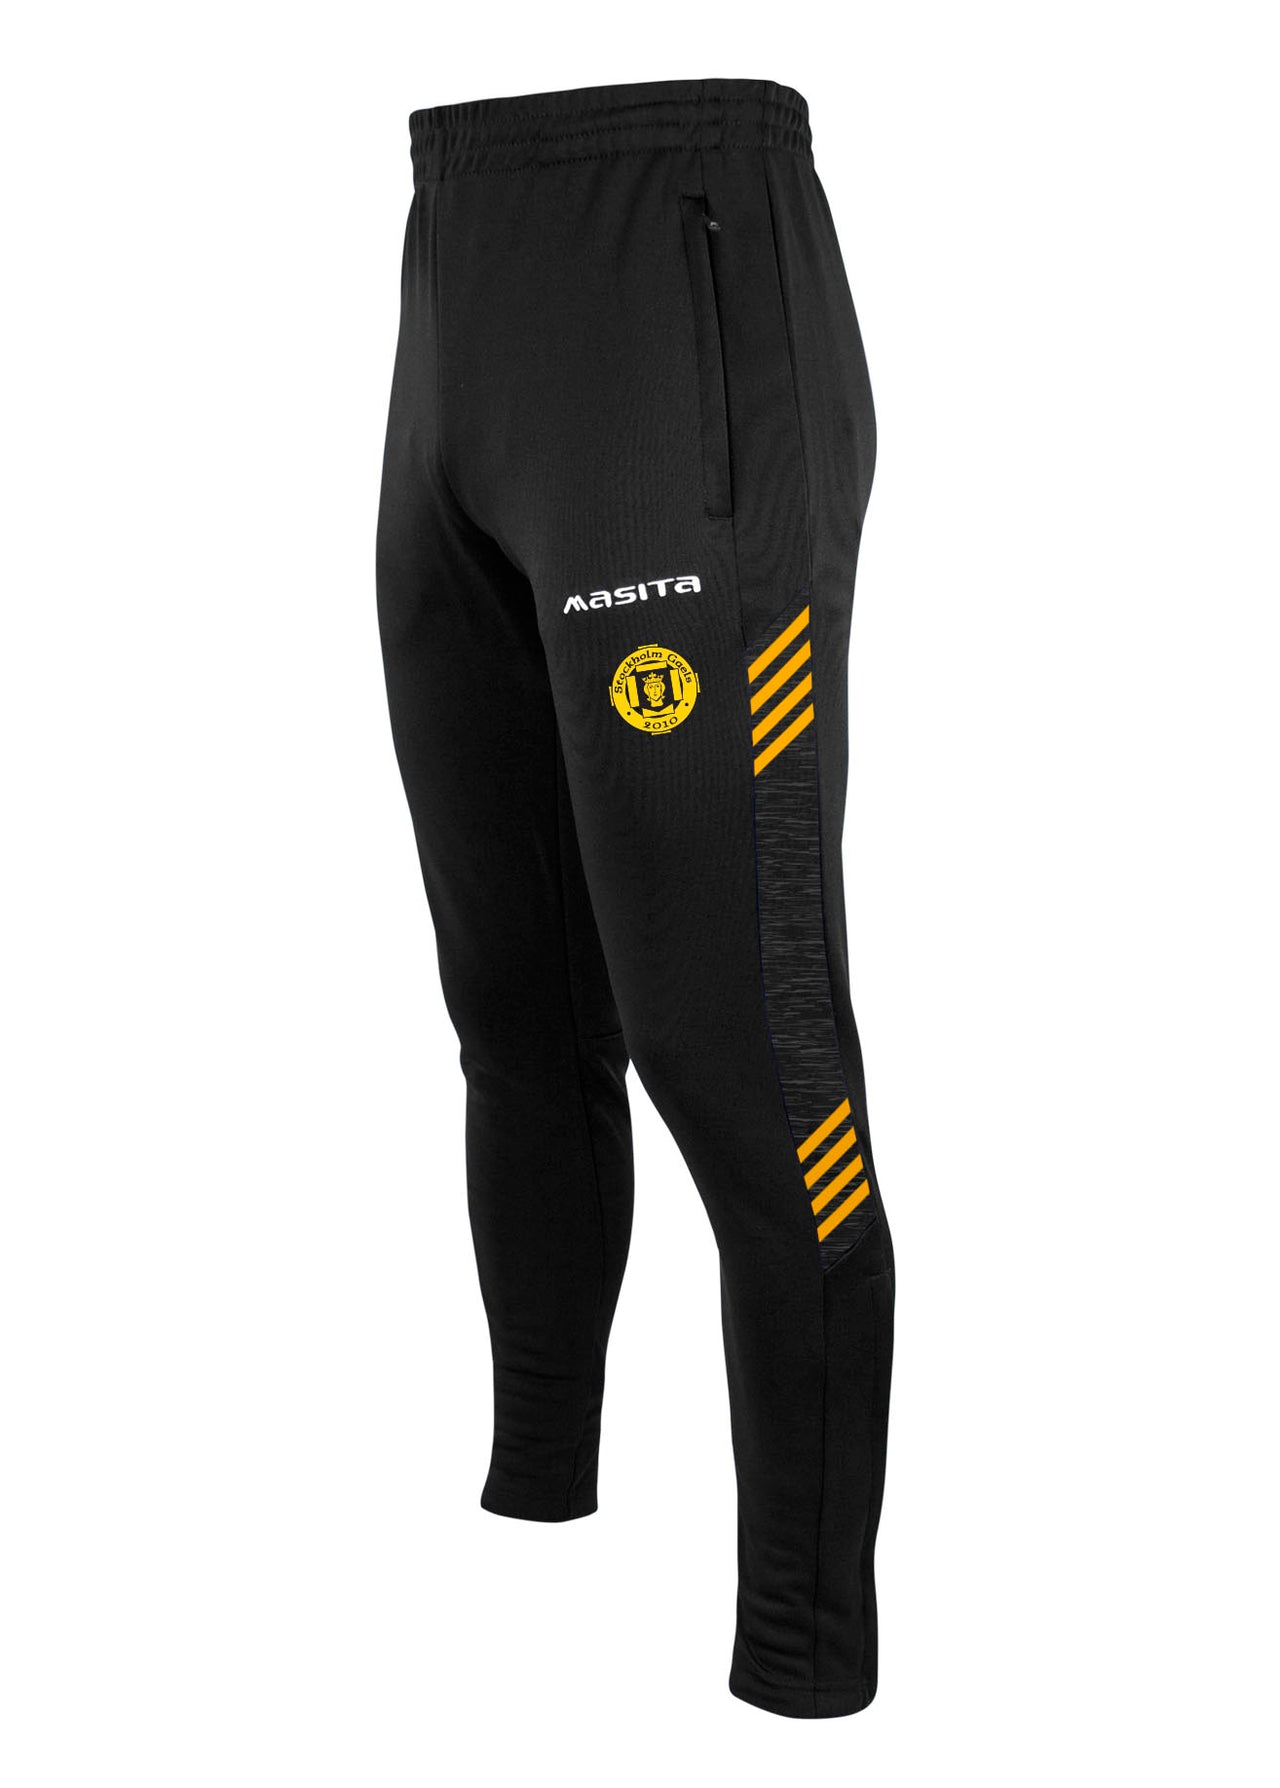 Stockholm Gaels Hydro Skinny Bottoms Adults